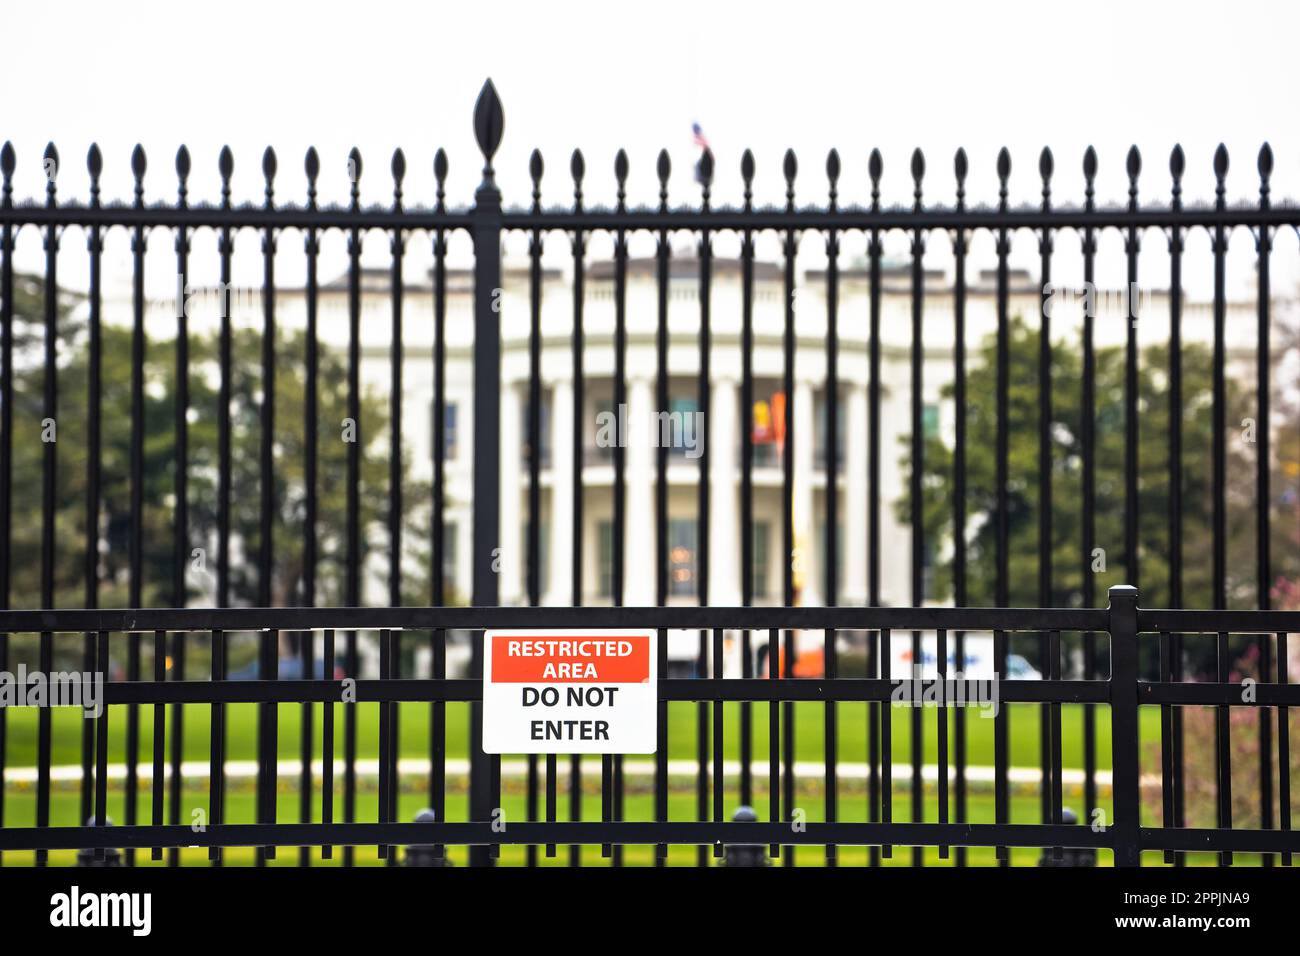 White House back garden iron fence and security warning view Stock Photo